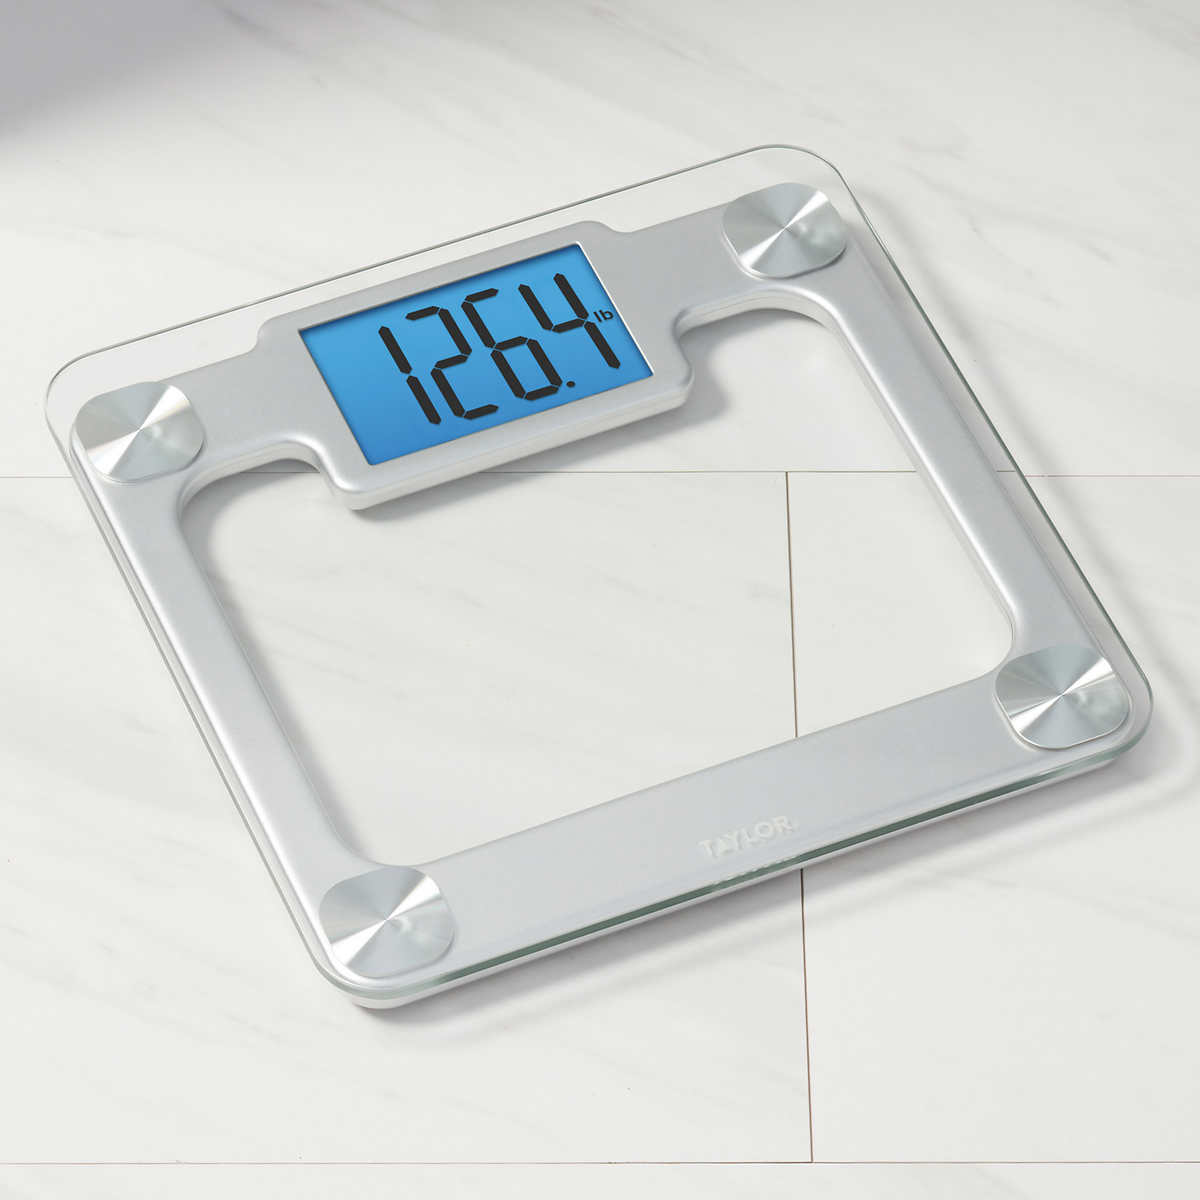 Digital Electronic Glass Bathroom Scales Weighing Weight Scale KG LB STONE 